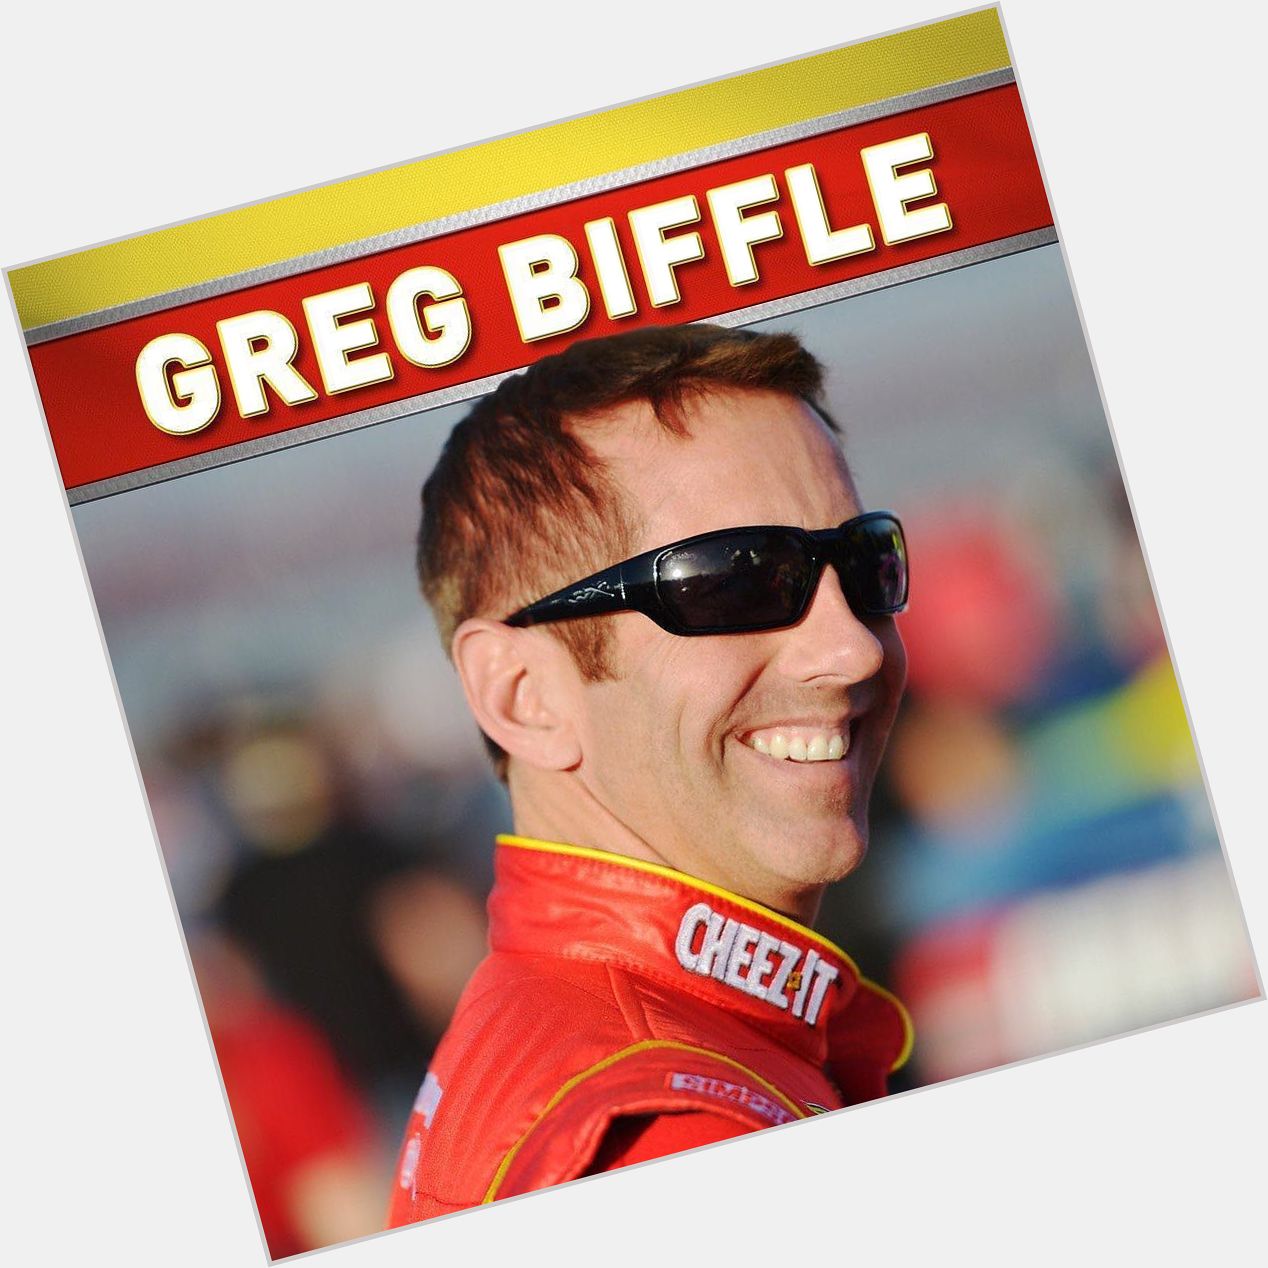 Comment with your favorite bday emoji to wish Greg Biffle a happy one today! by nascar 